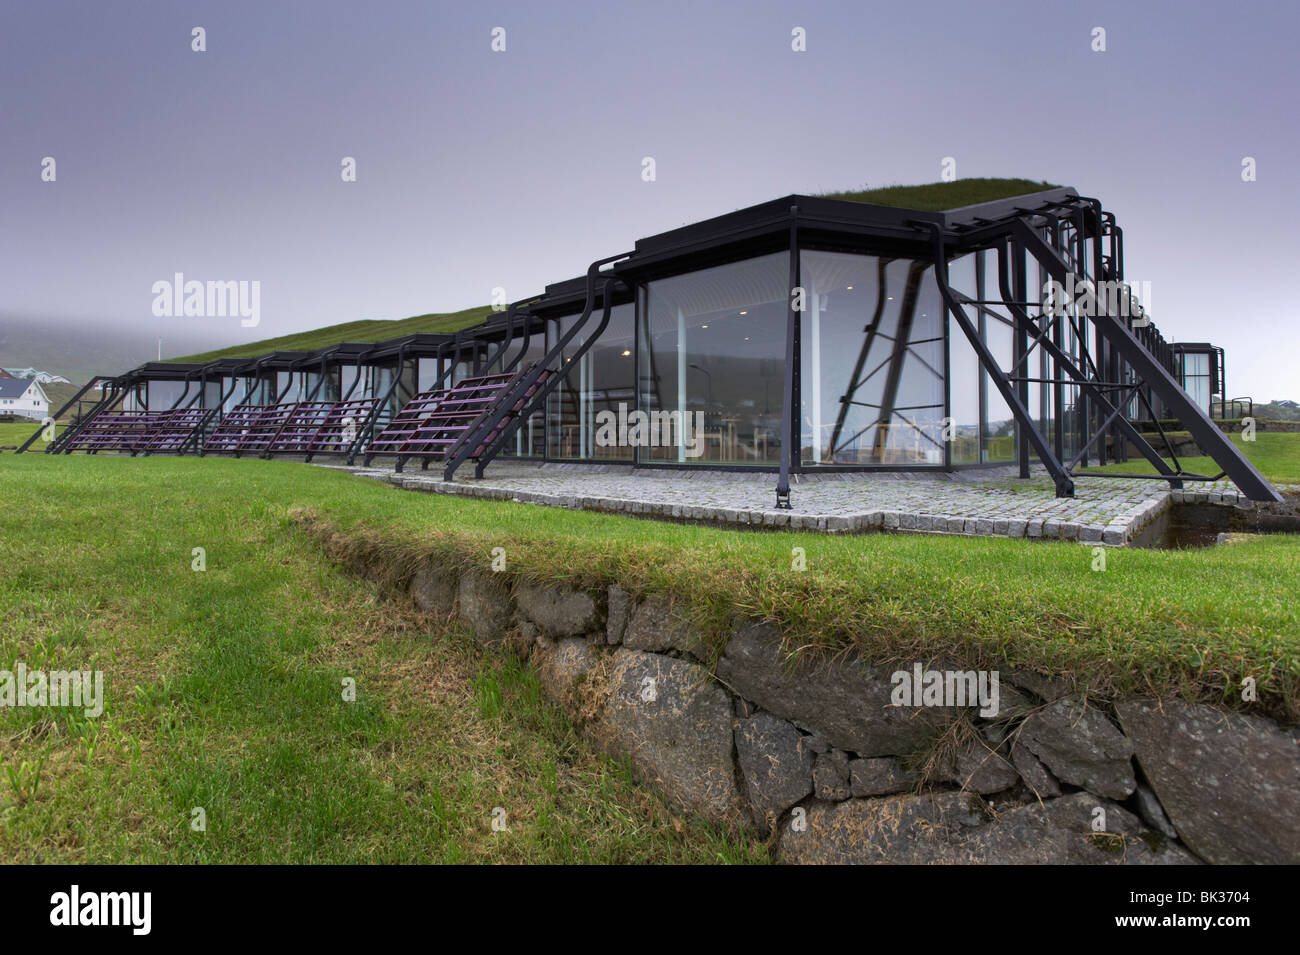 Nordic House, exteriors and turf covered roof, Torshavn, Streymoy, Faroe Islands (Faroes), Denmark, Europe Stock Photo